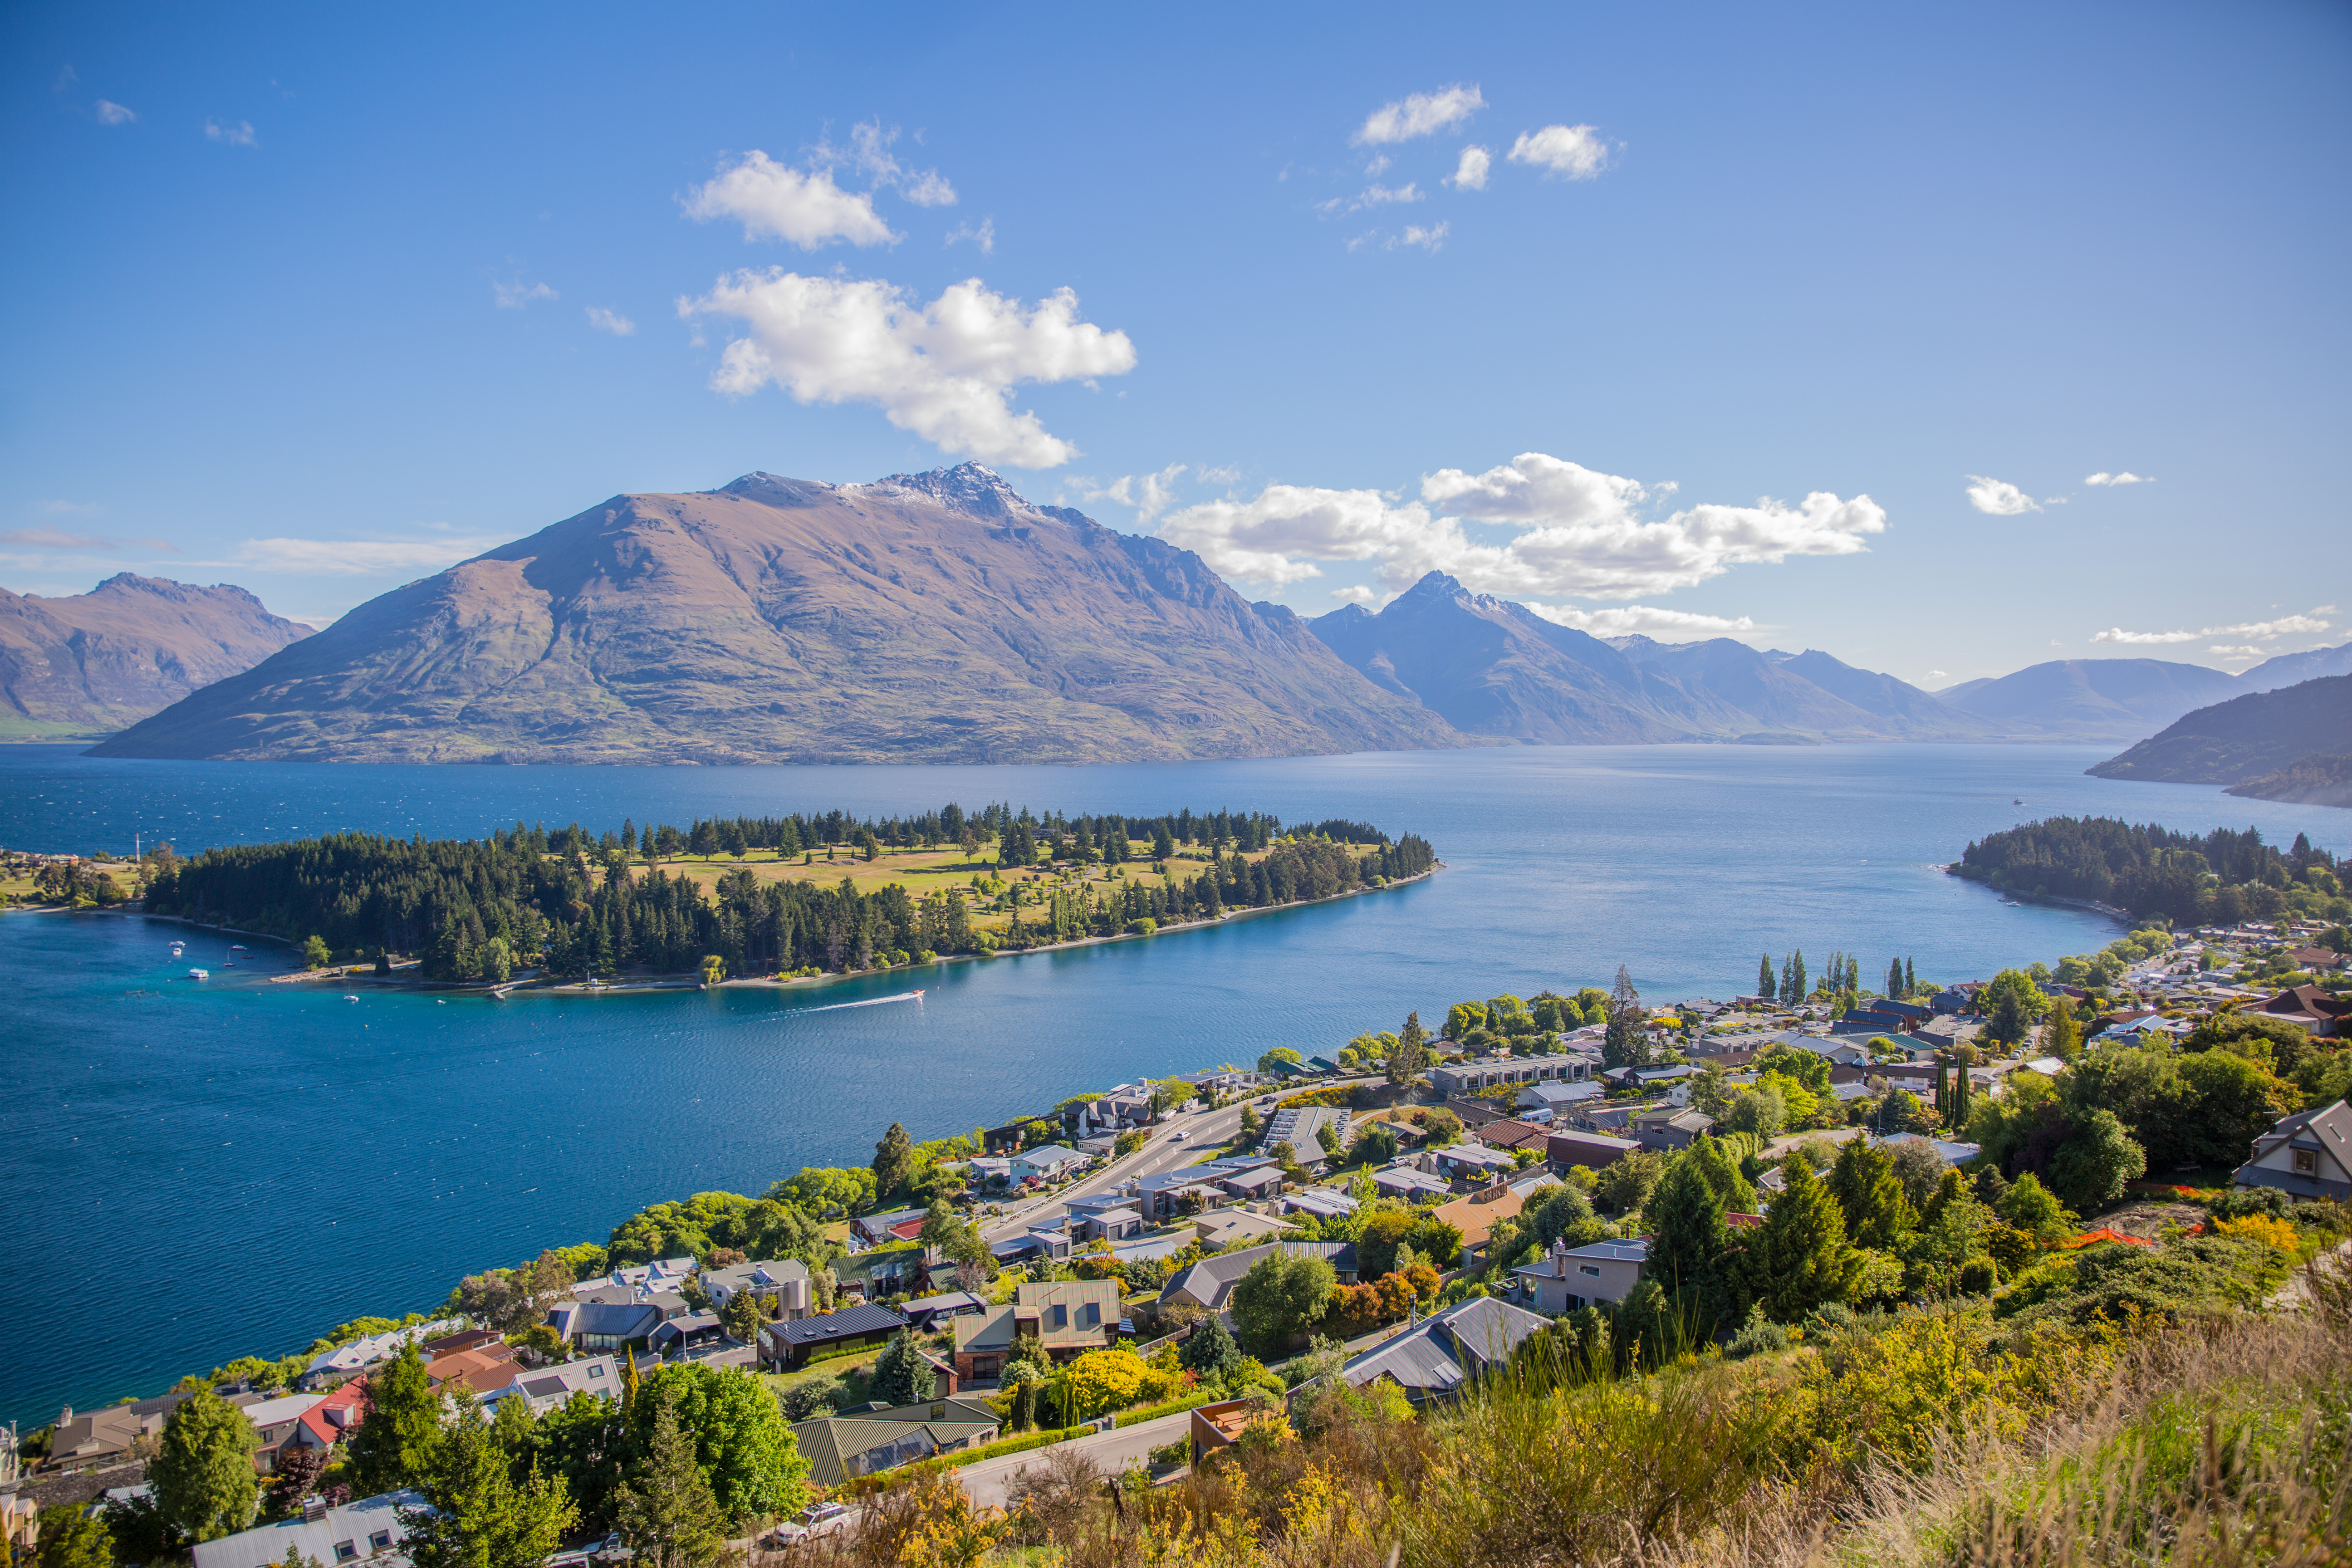 Overlook and Scenic landscape at Queenstown, New Zealand image - Free ...